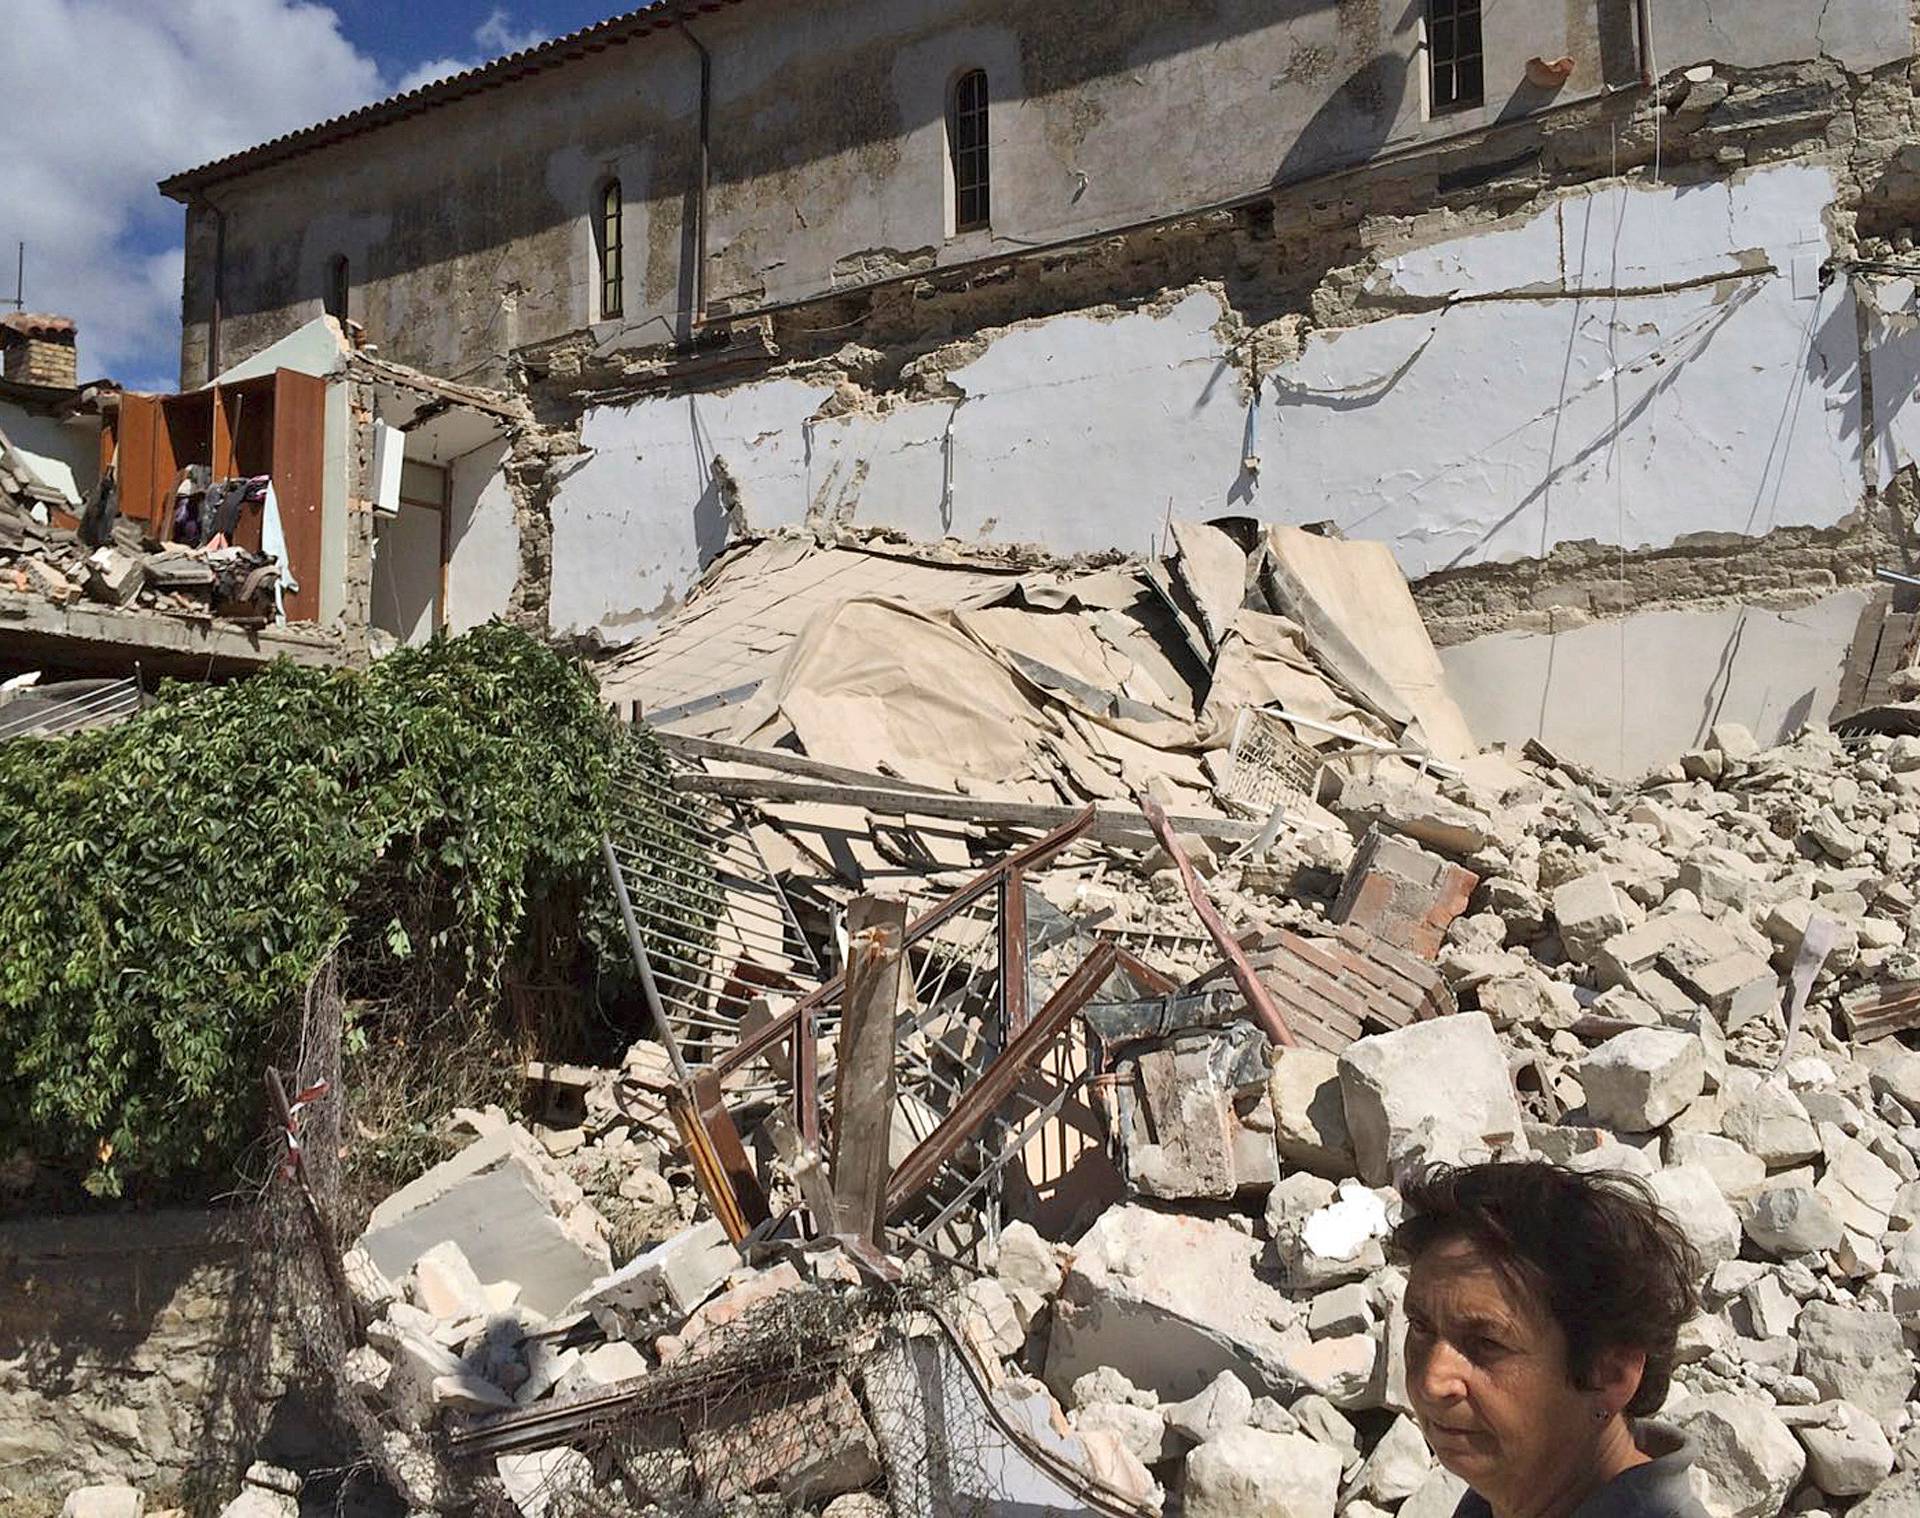 A woman stands in front of a collapsed house following an earthquake in Accumoli di Rieti